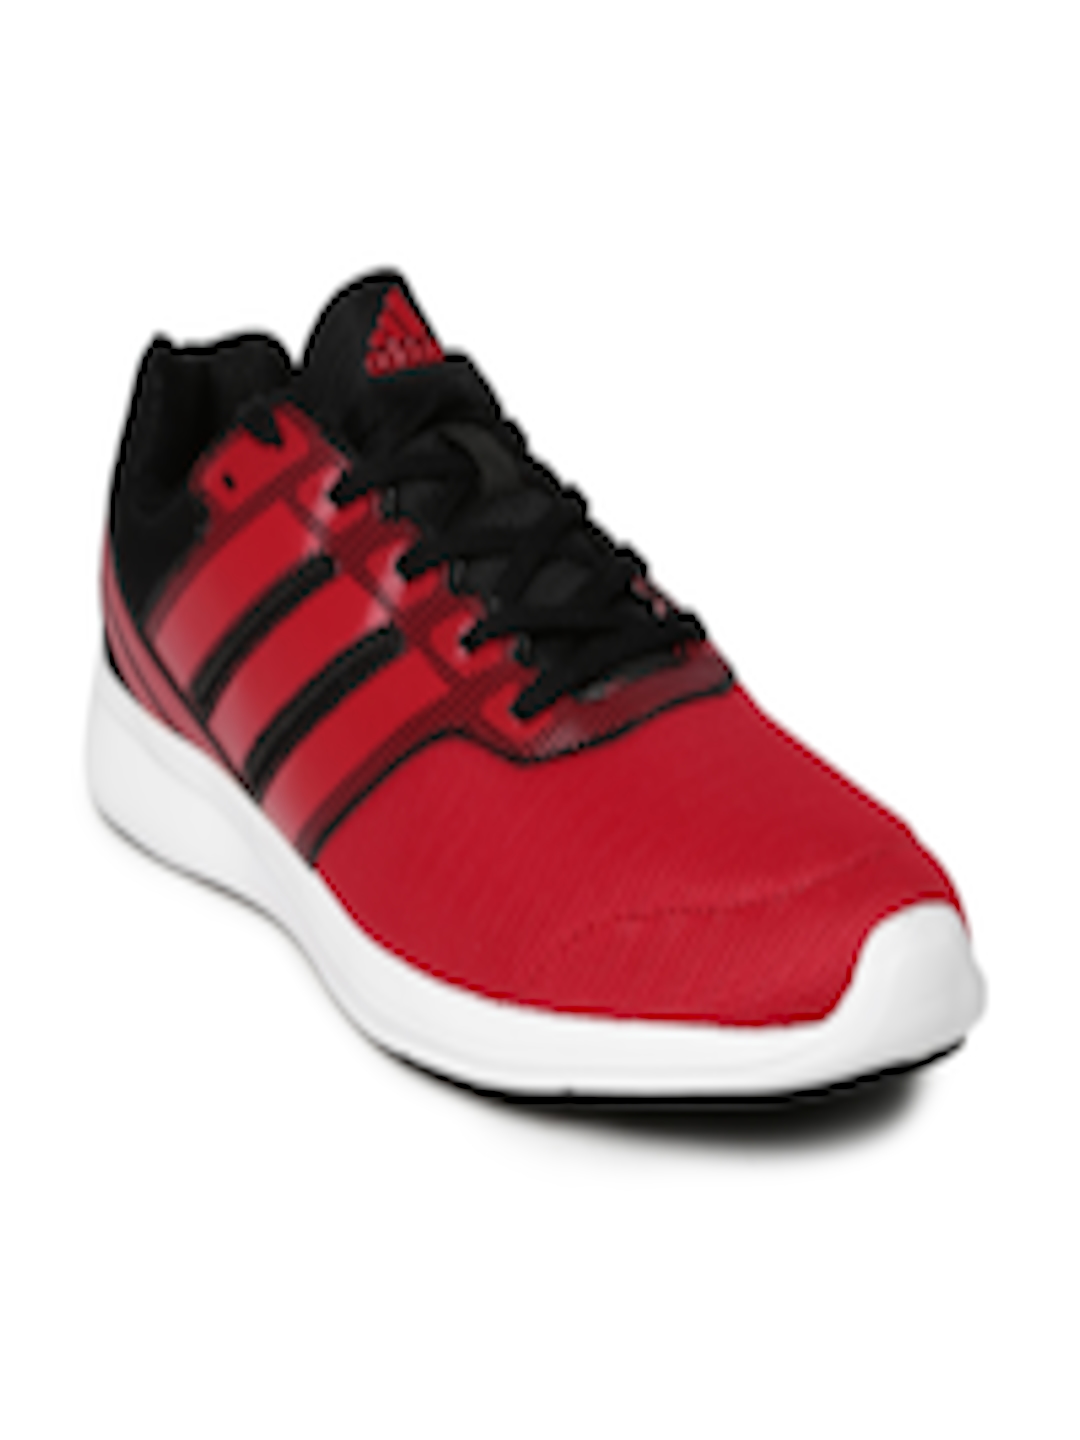 Buy ADIDAS Men Red Adipacer Running Shoes - Sports Shoes for Men